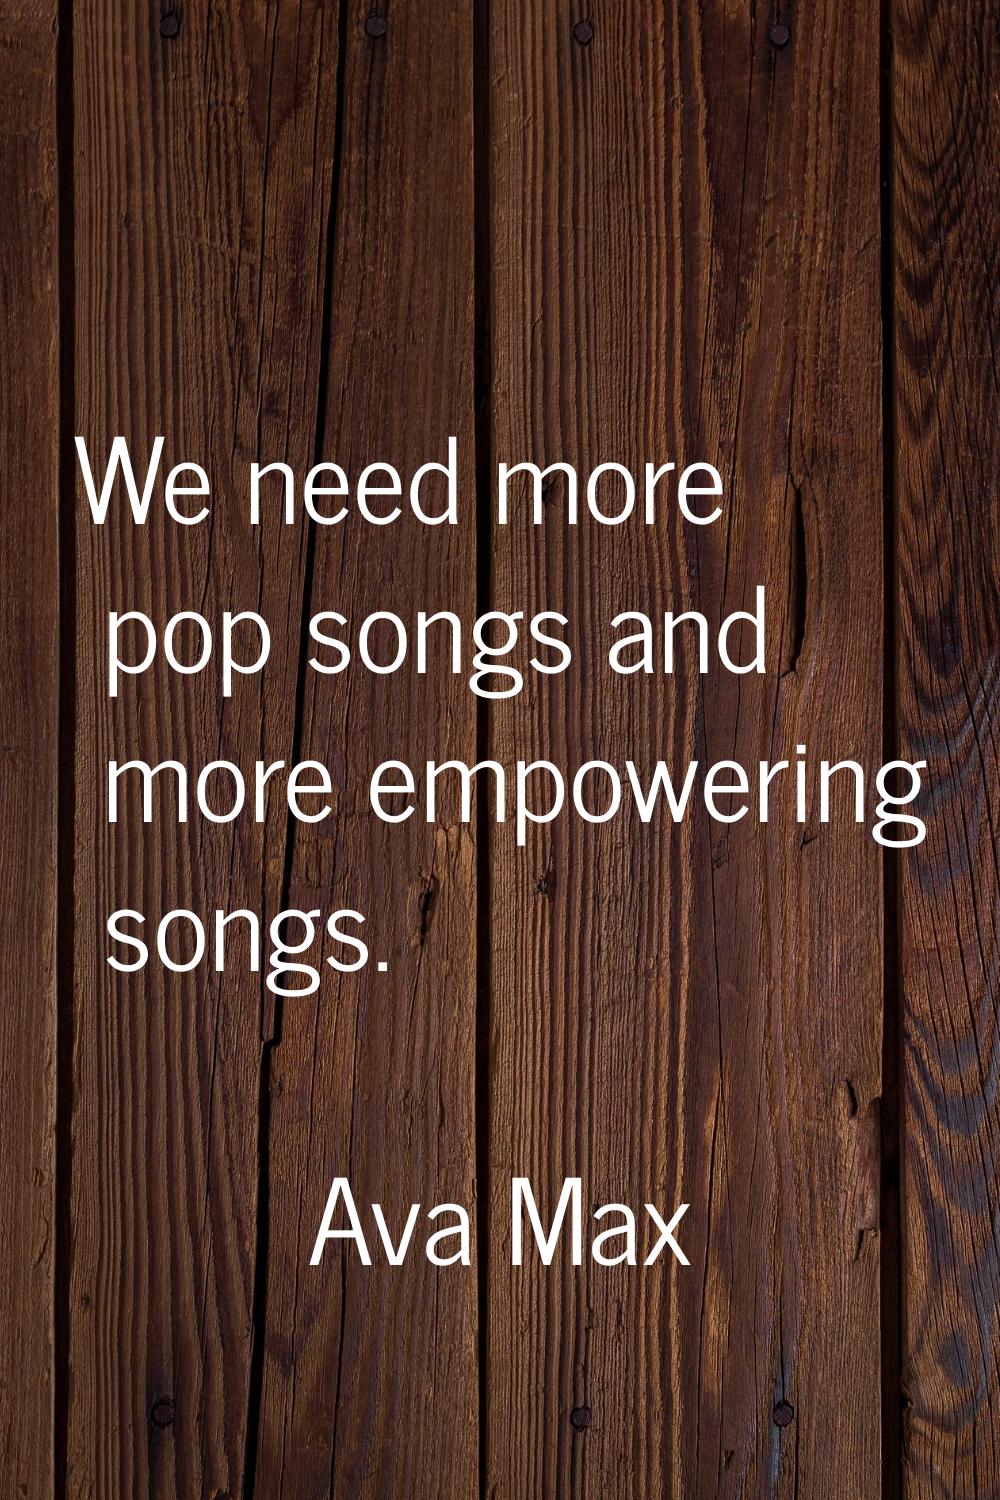 We need more pop songs and more empowering songs.